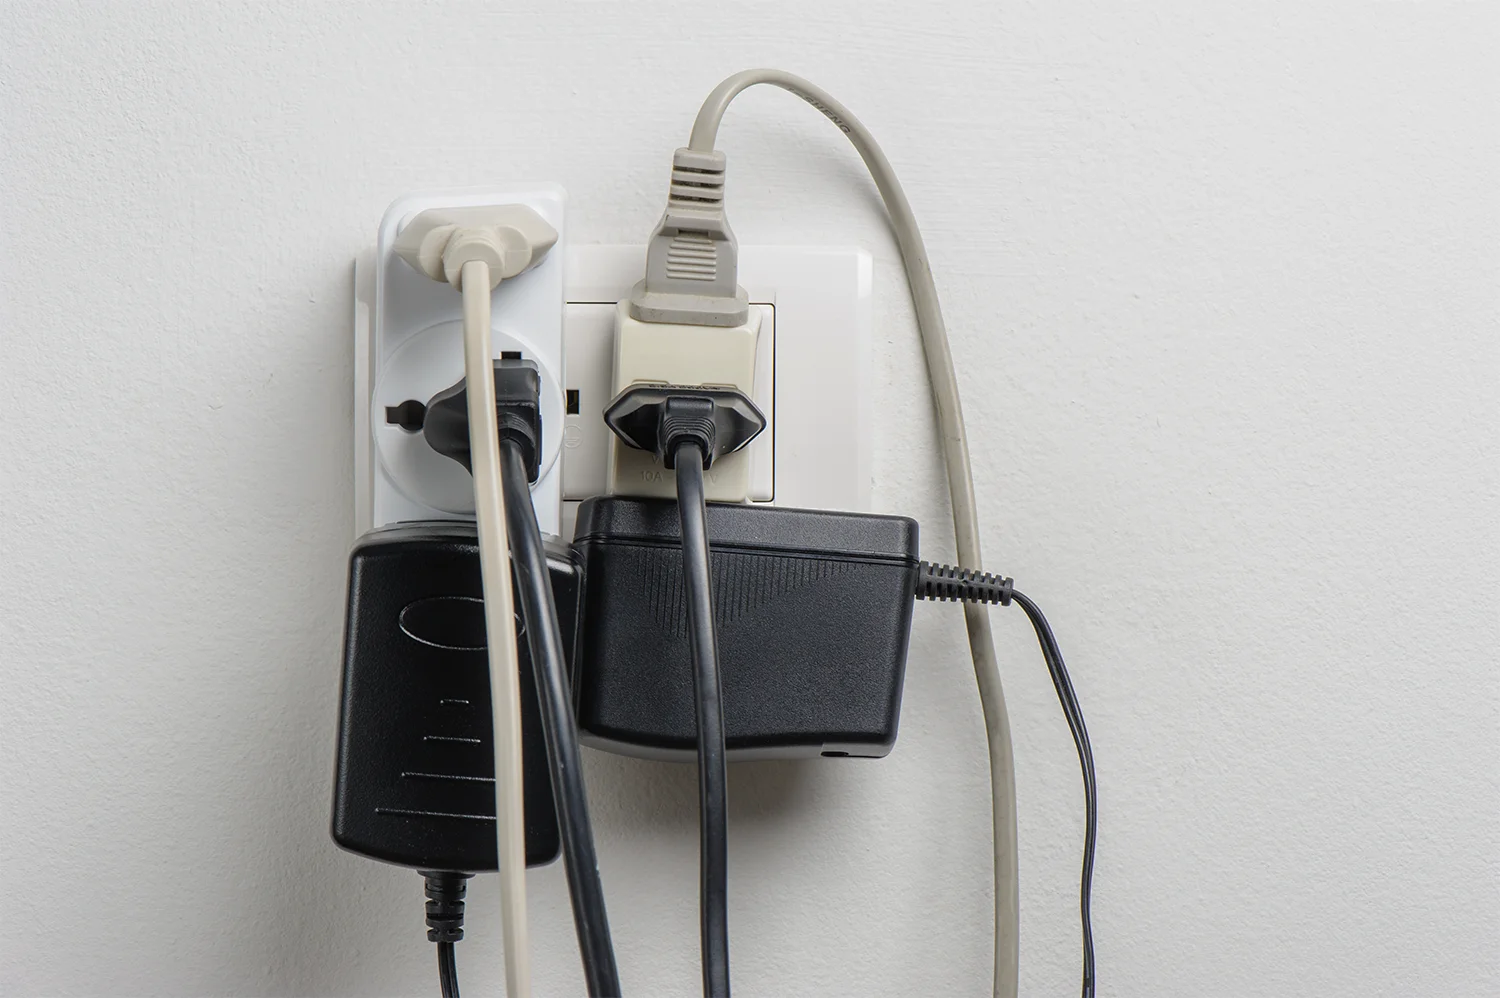 Multiple plugs plugged into one outlet - an example of a home electrical hazard.